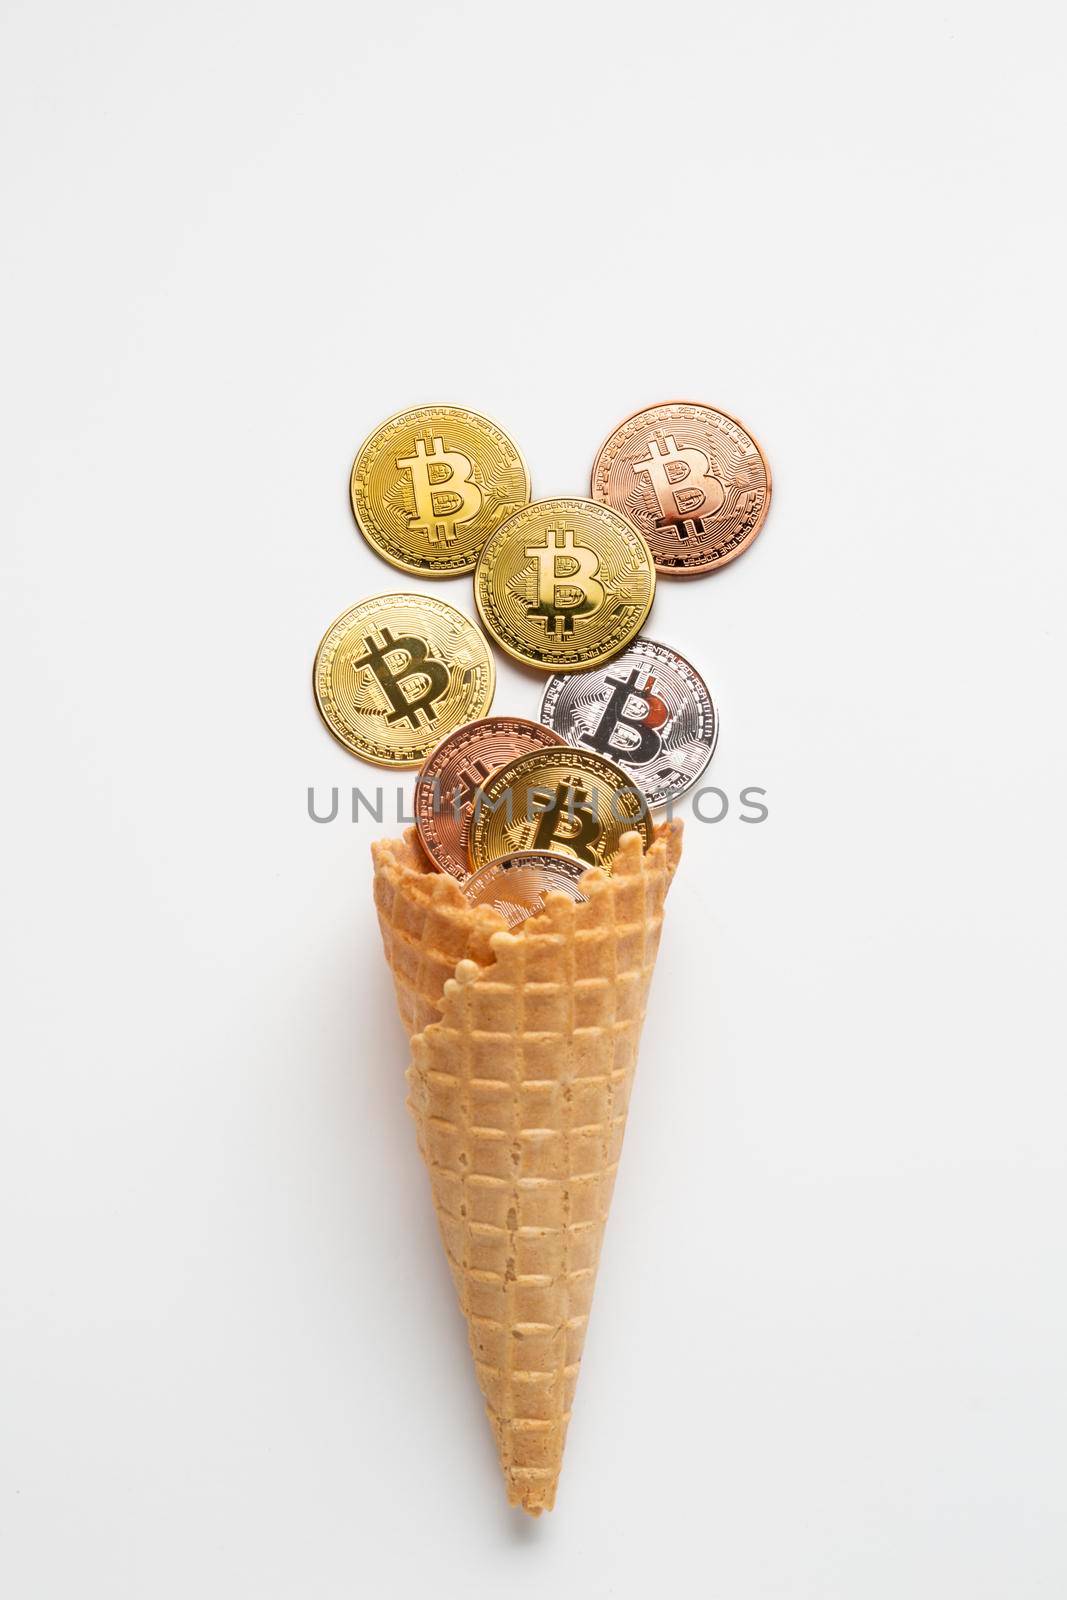 currency ice cream with bitcoin. High quality photo by Zahard